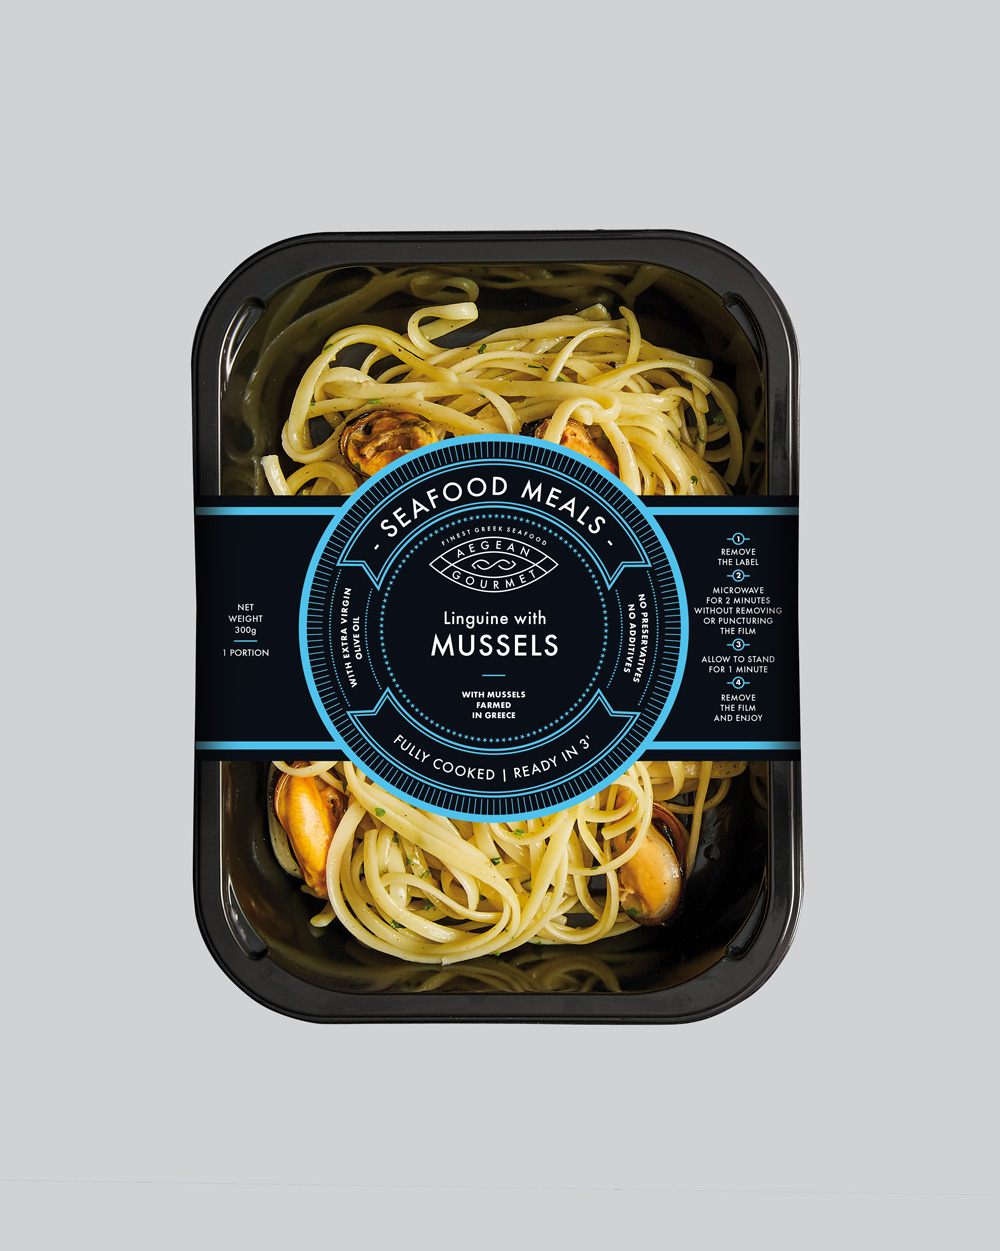 Seafood Meal product into packaging, Linguine with mussels